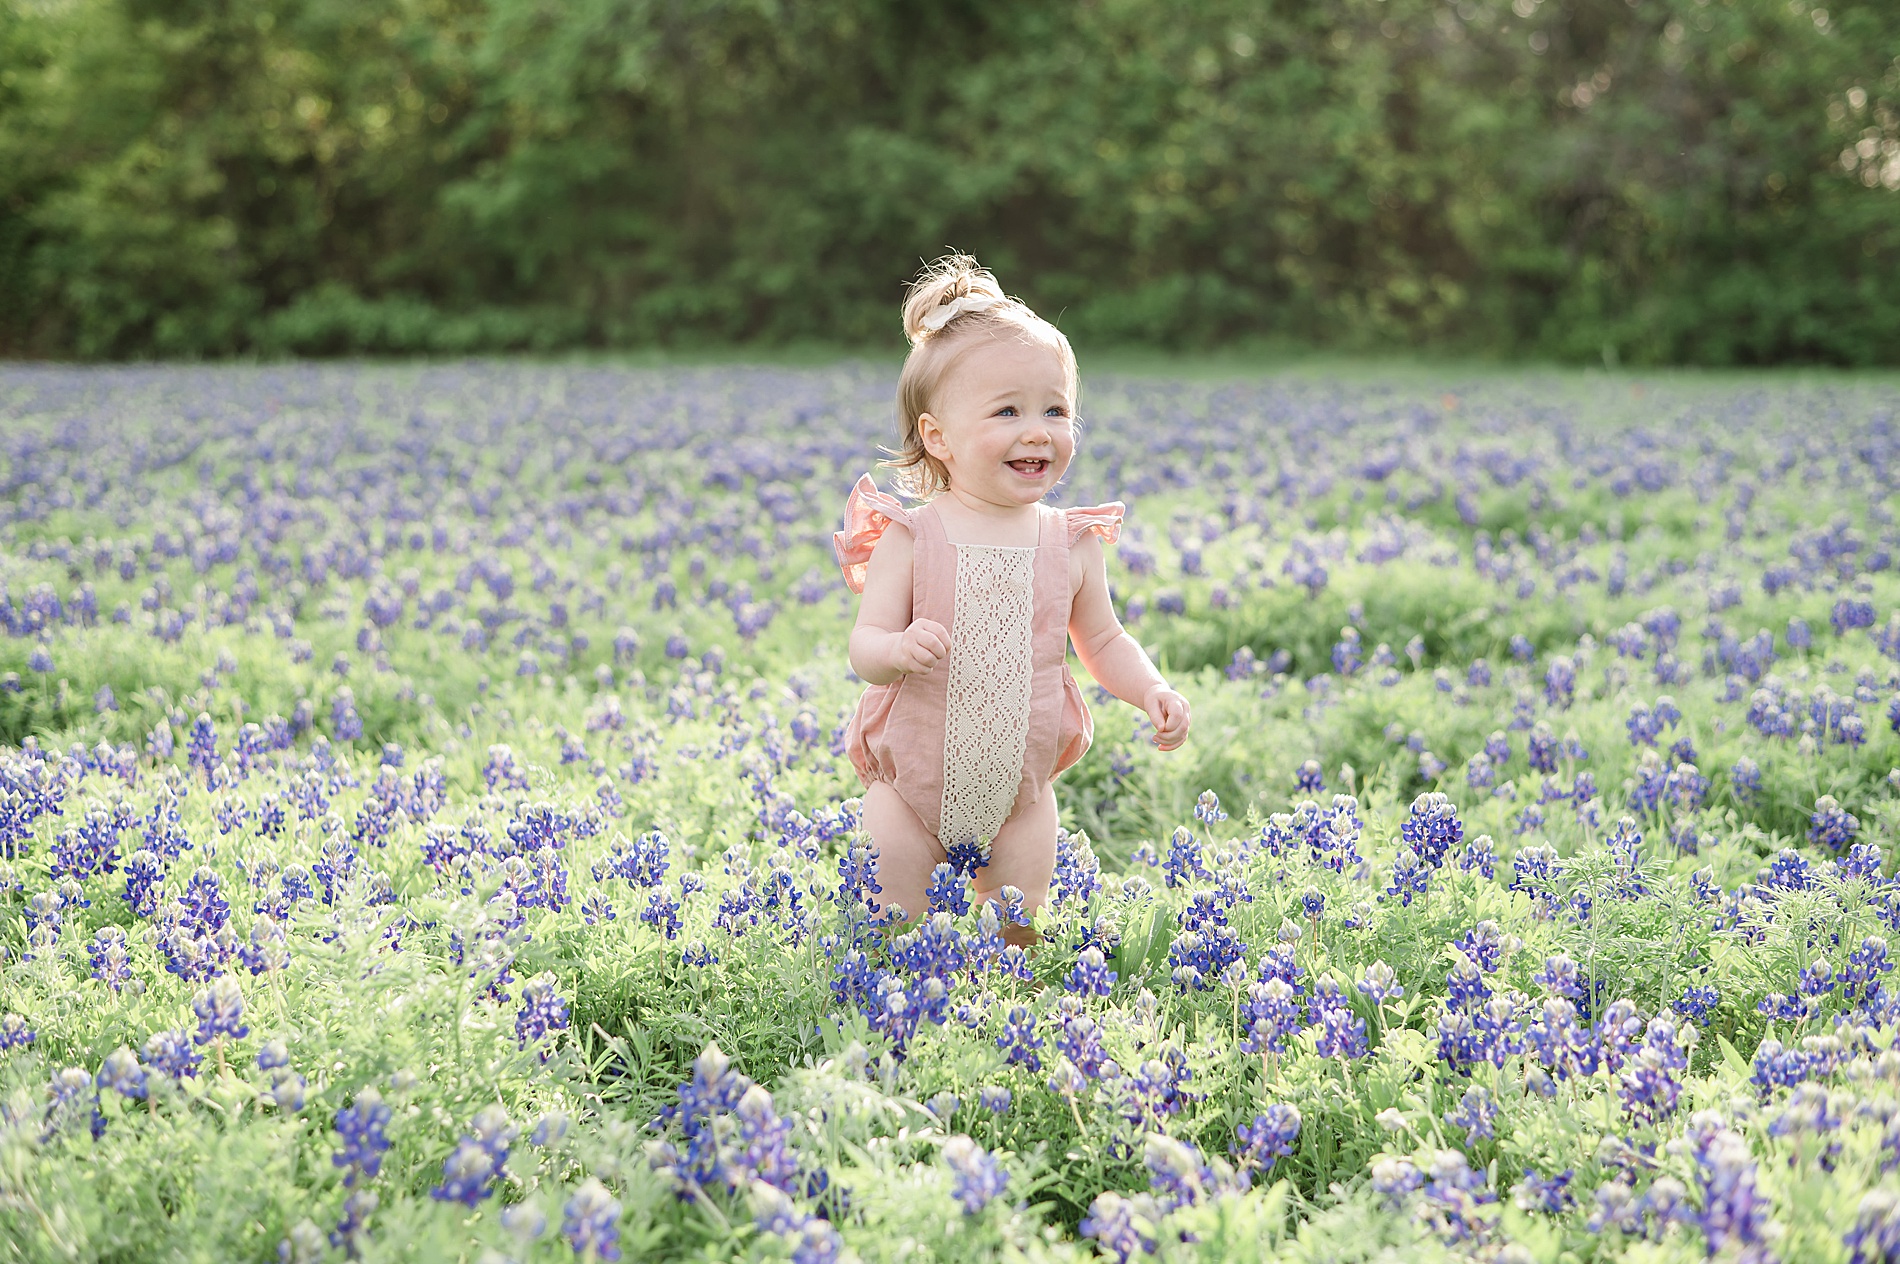 little girl explores field of bluebonnet flowers photographed by Lindsey Dutton Photography, a Dallas family photographer